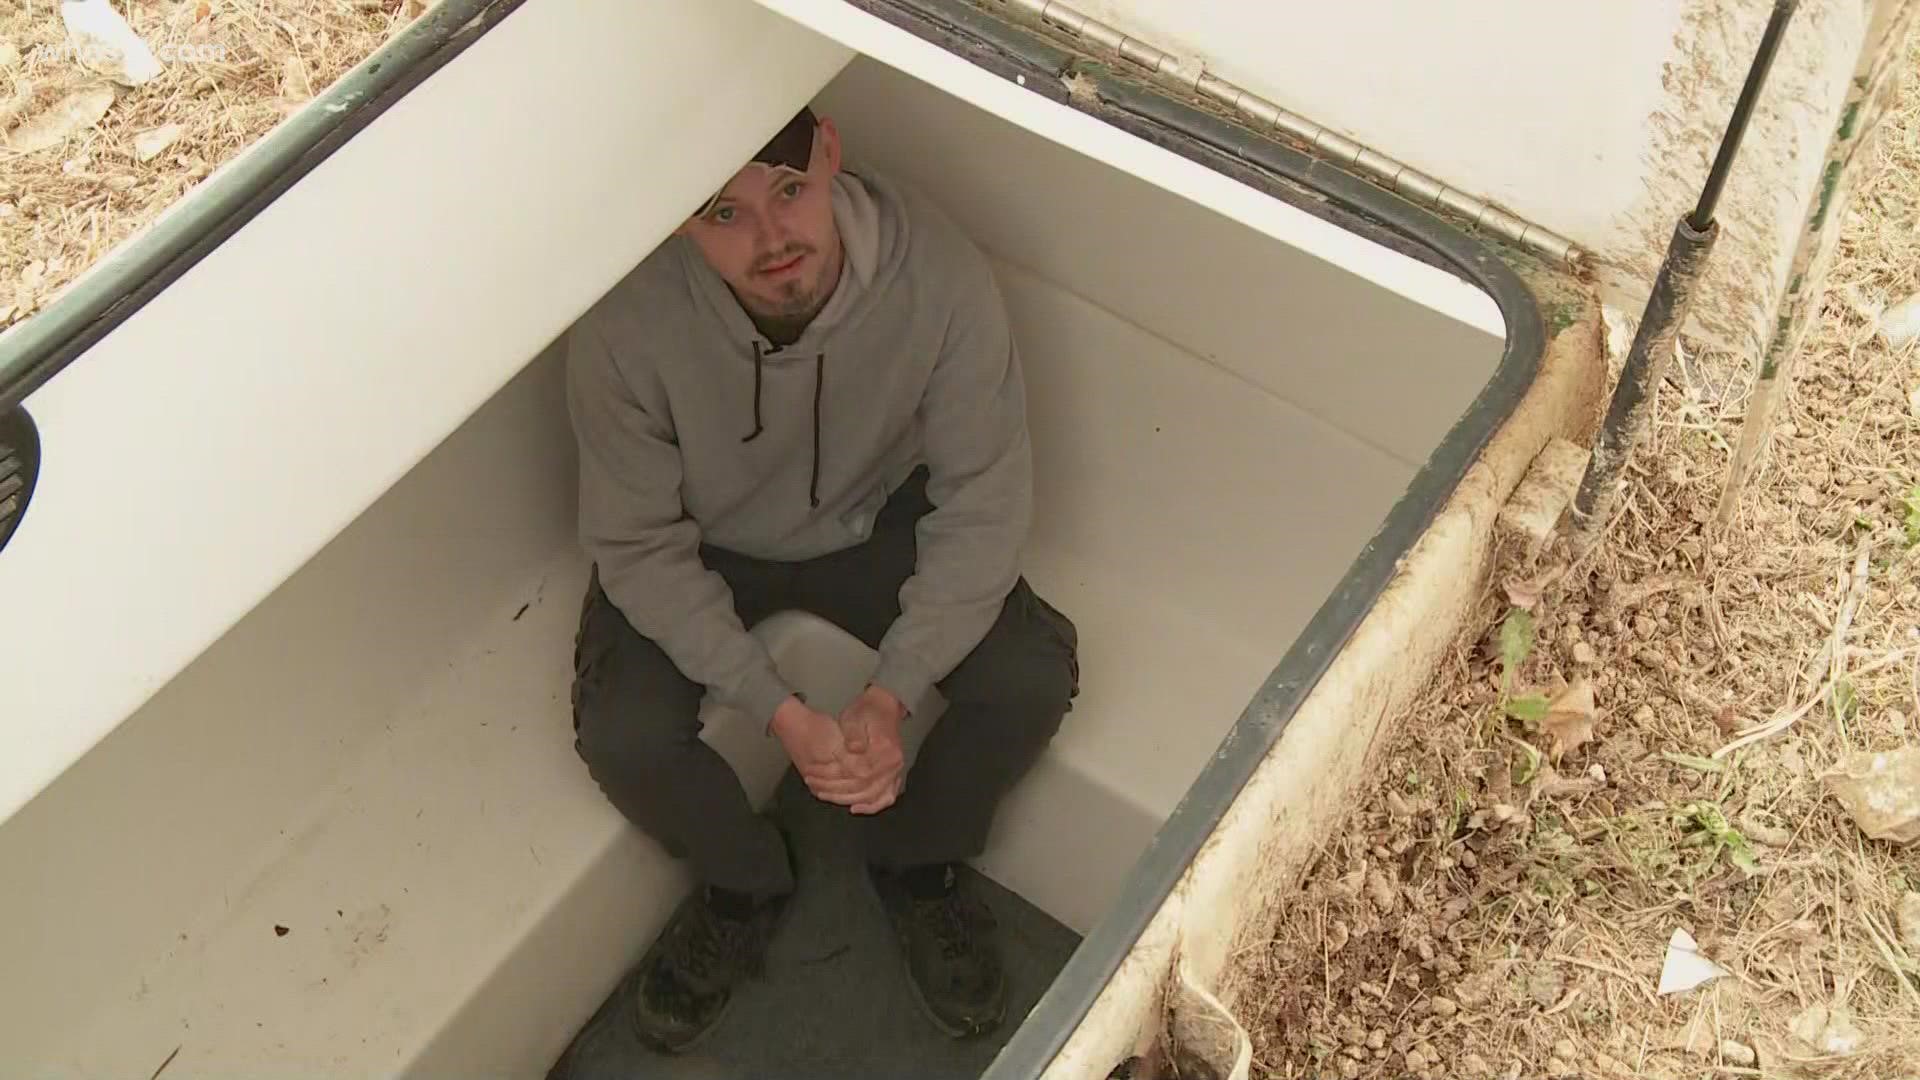 The family invested in the pre-fab storm shelter 10 years ago. The shelter is 10 feet underground and 12 feet wide.